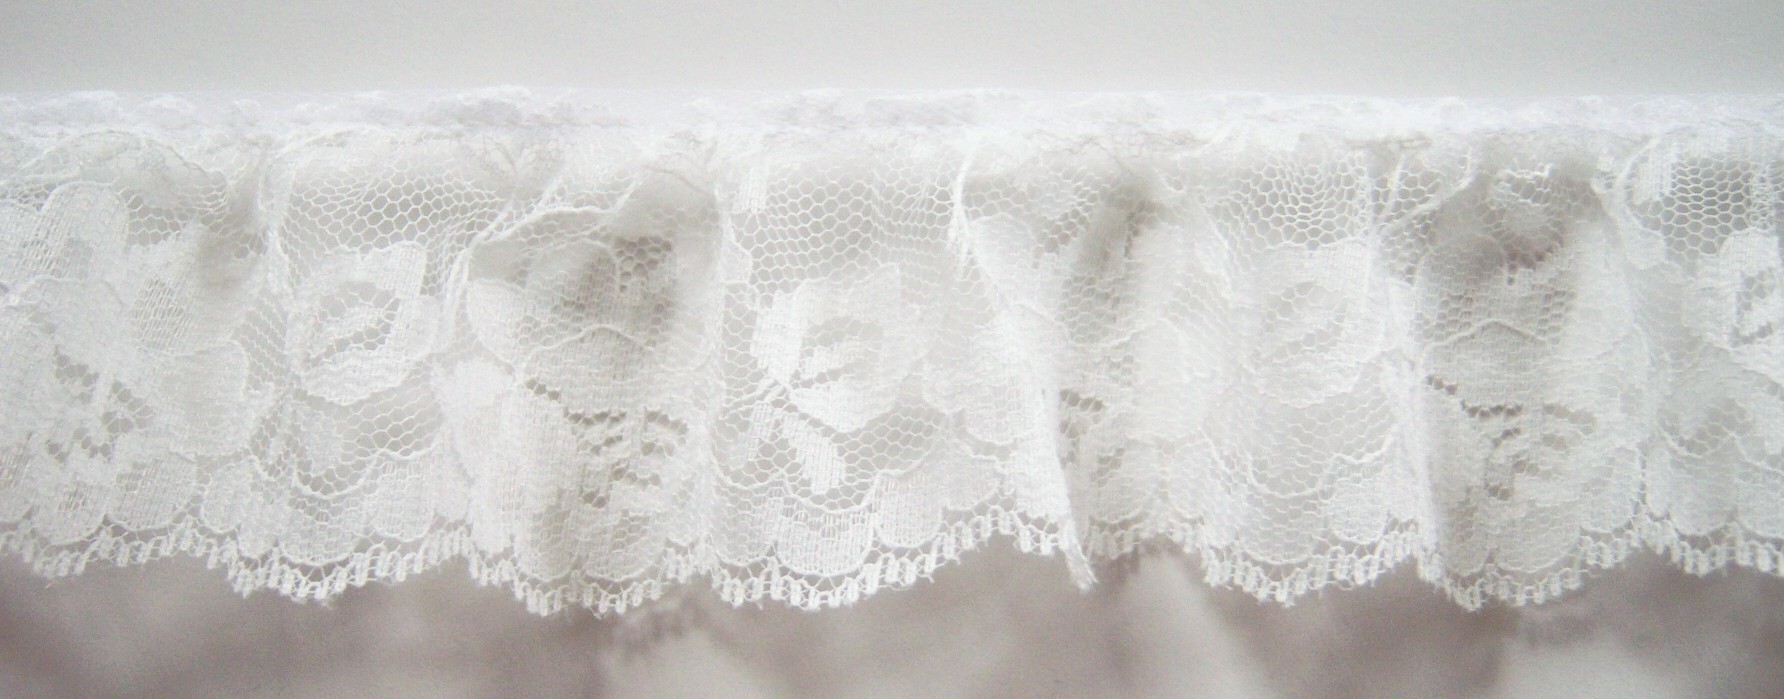 Antique White 2 1/2" Ruffled Lace